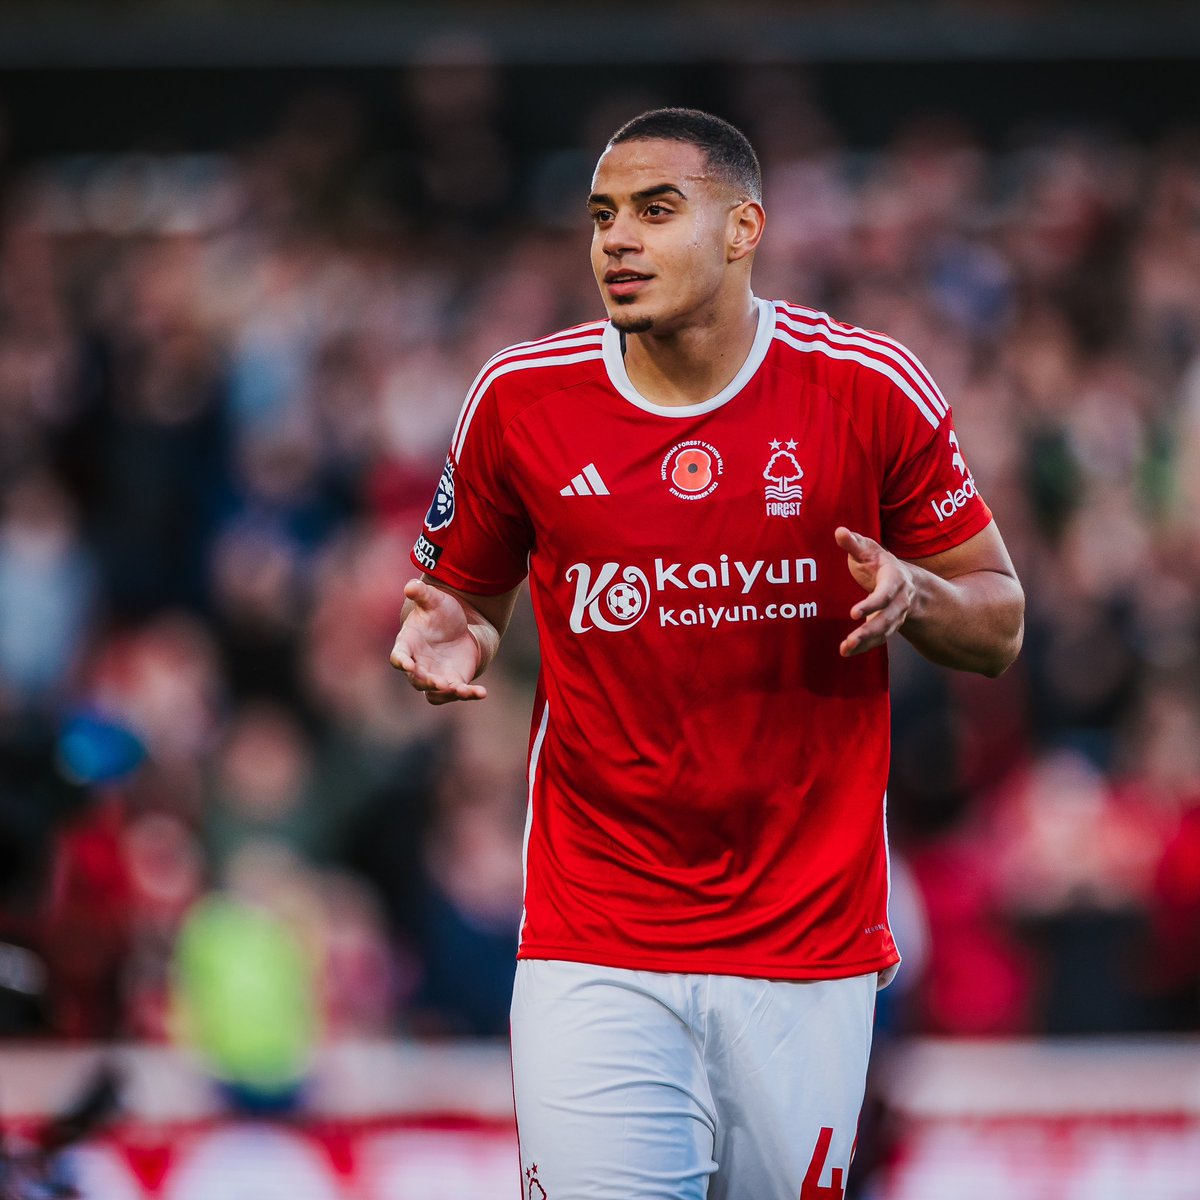 From Corinthians under 21s to a Premier League club’s player of the season. At 21 years old.

Special player, special future ahead. Privilege to watch him play for #NFFC.